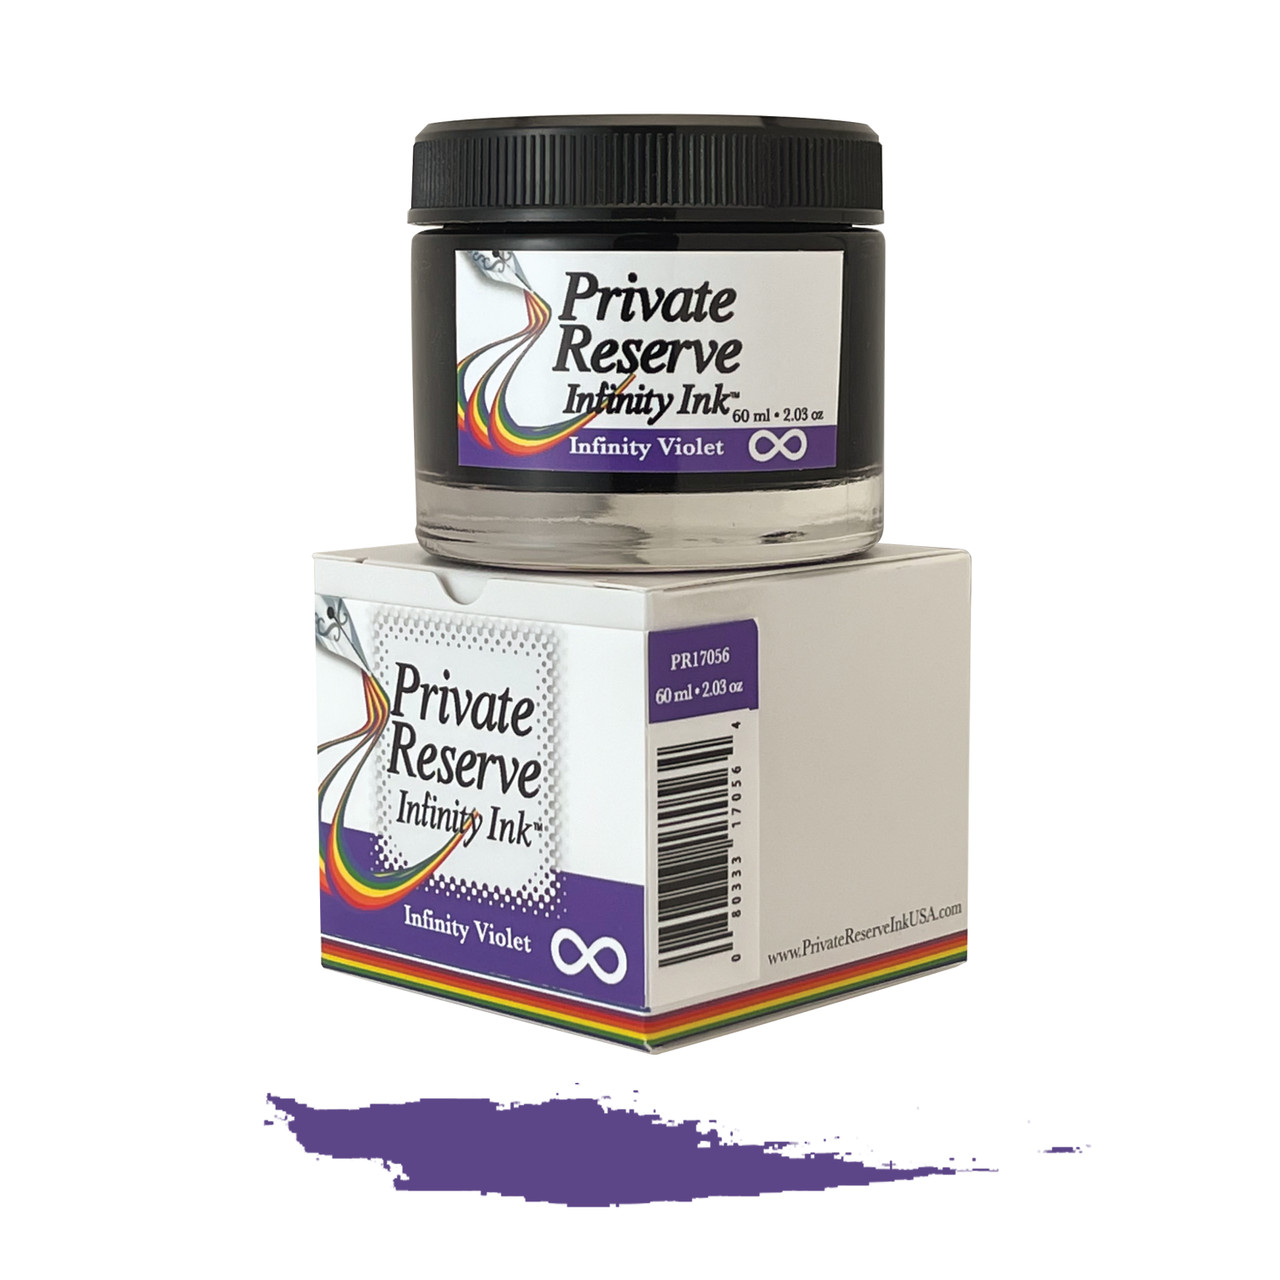 Private Reserve Infinity Ink Violet 60ml